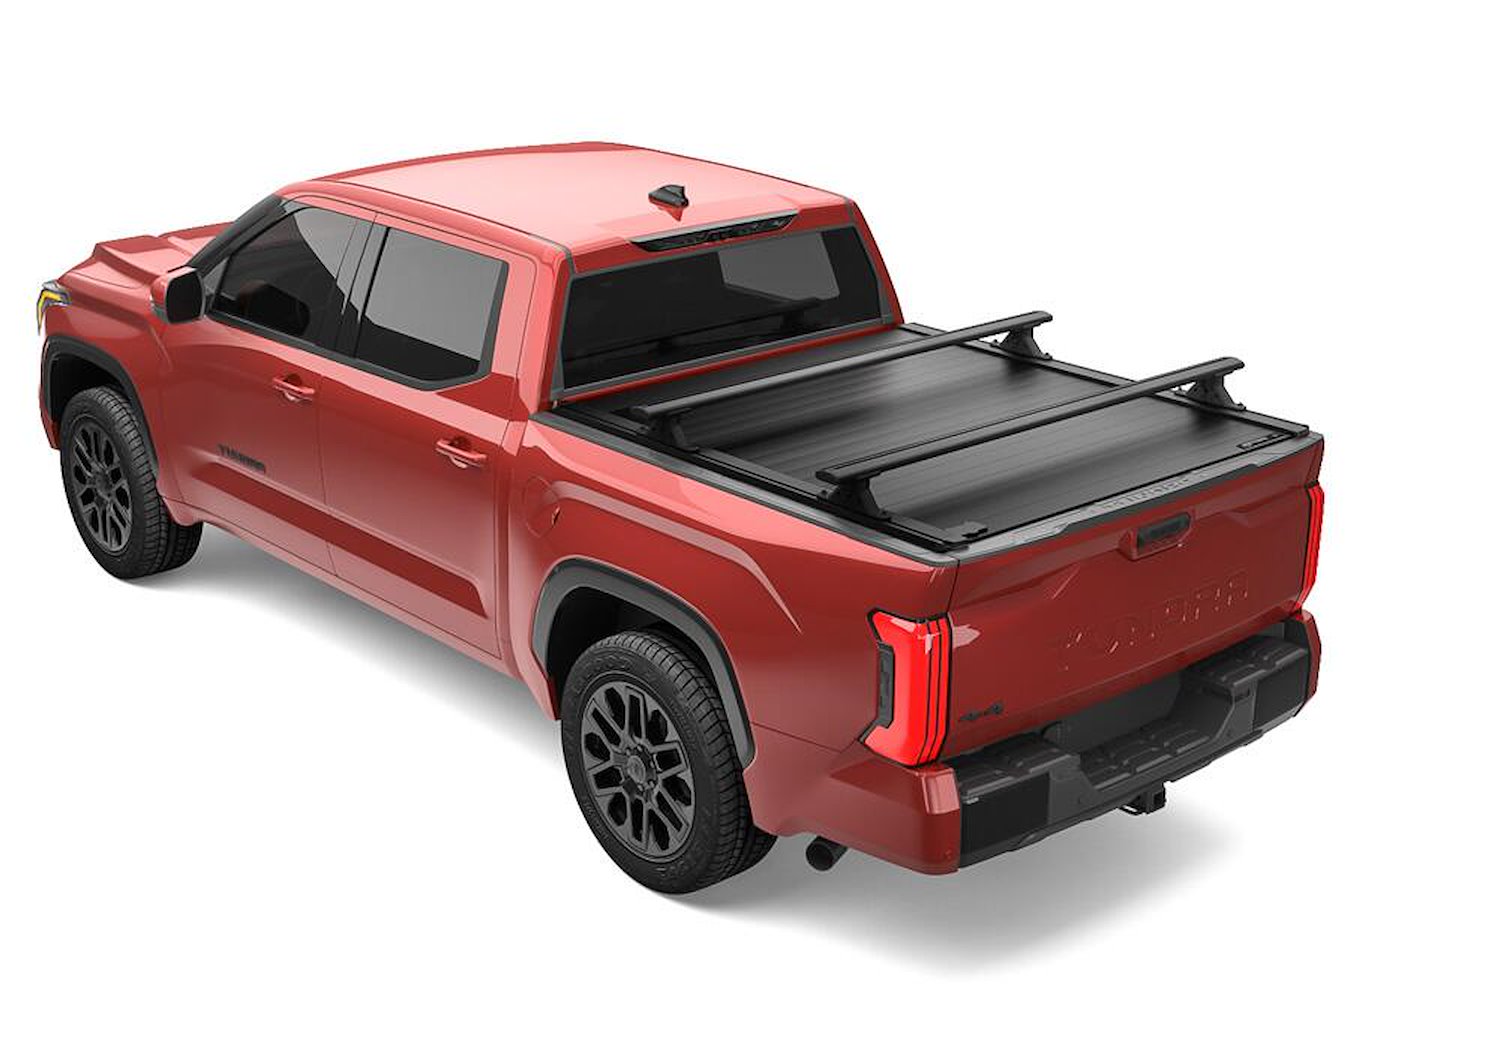 80863 RetraxPRO MX Retractable Tonneau Cover Fits Select Toyota Tundra Regular/Double Cab 6' 7" Bed with Deck Rail System